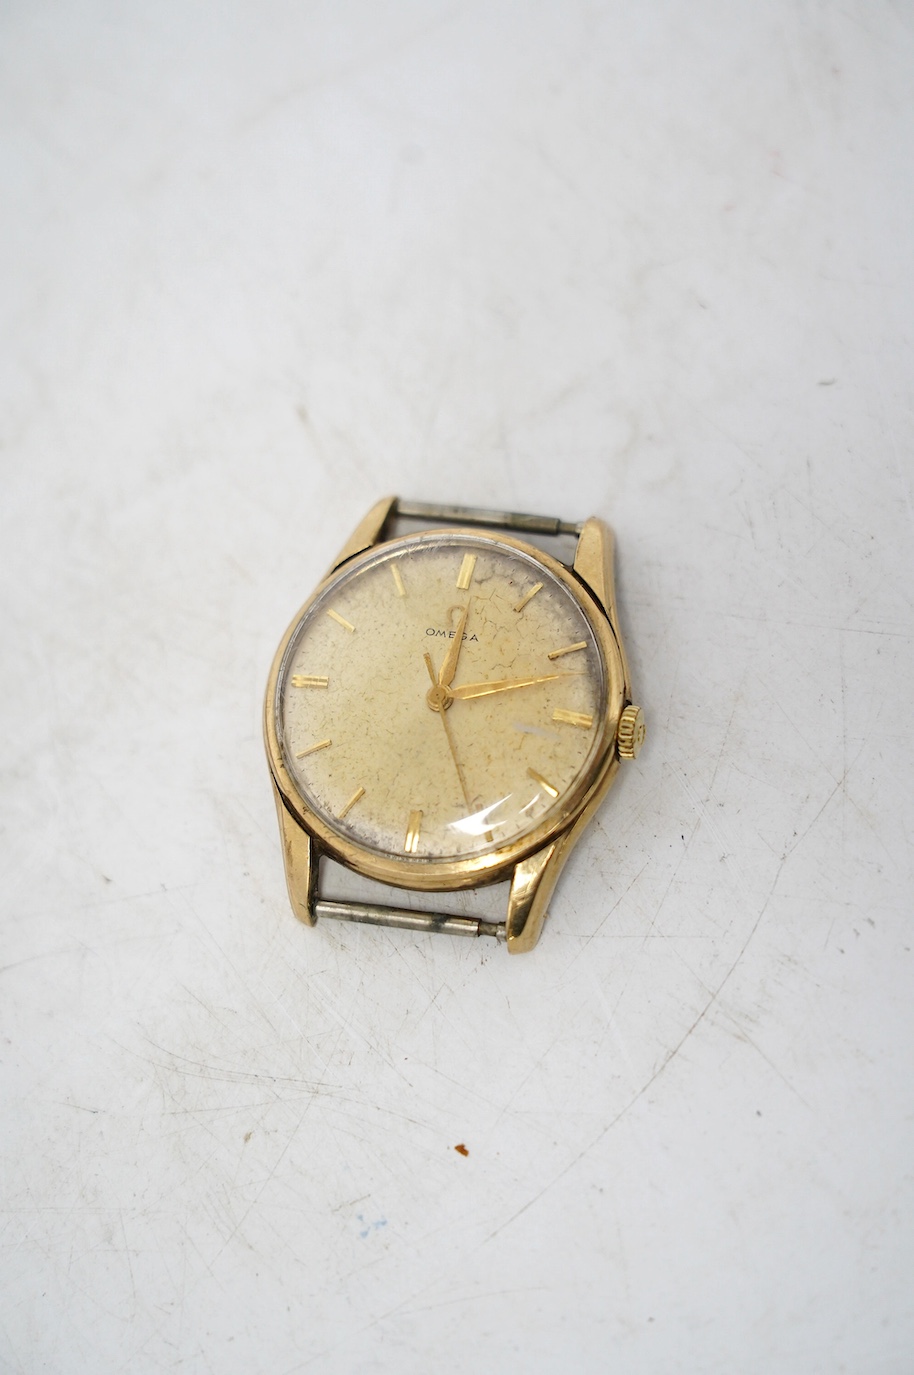 A gentleman's 9ct gold Omega manual wind wrist watch, no strap, case diameter 34mm, with Omega box. Condition - poor